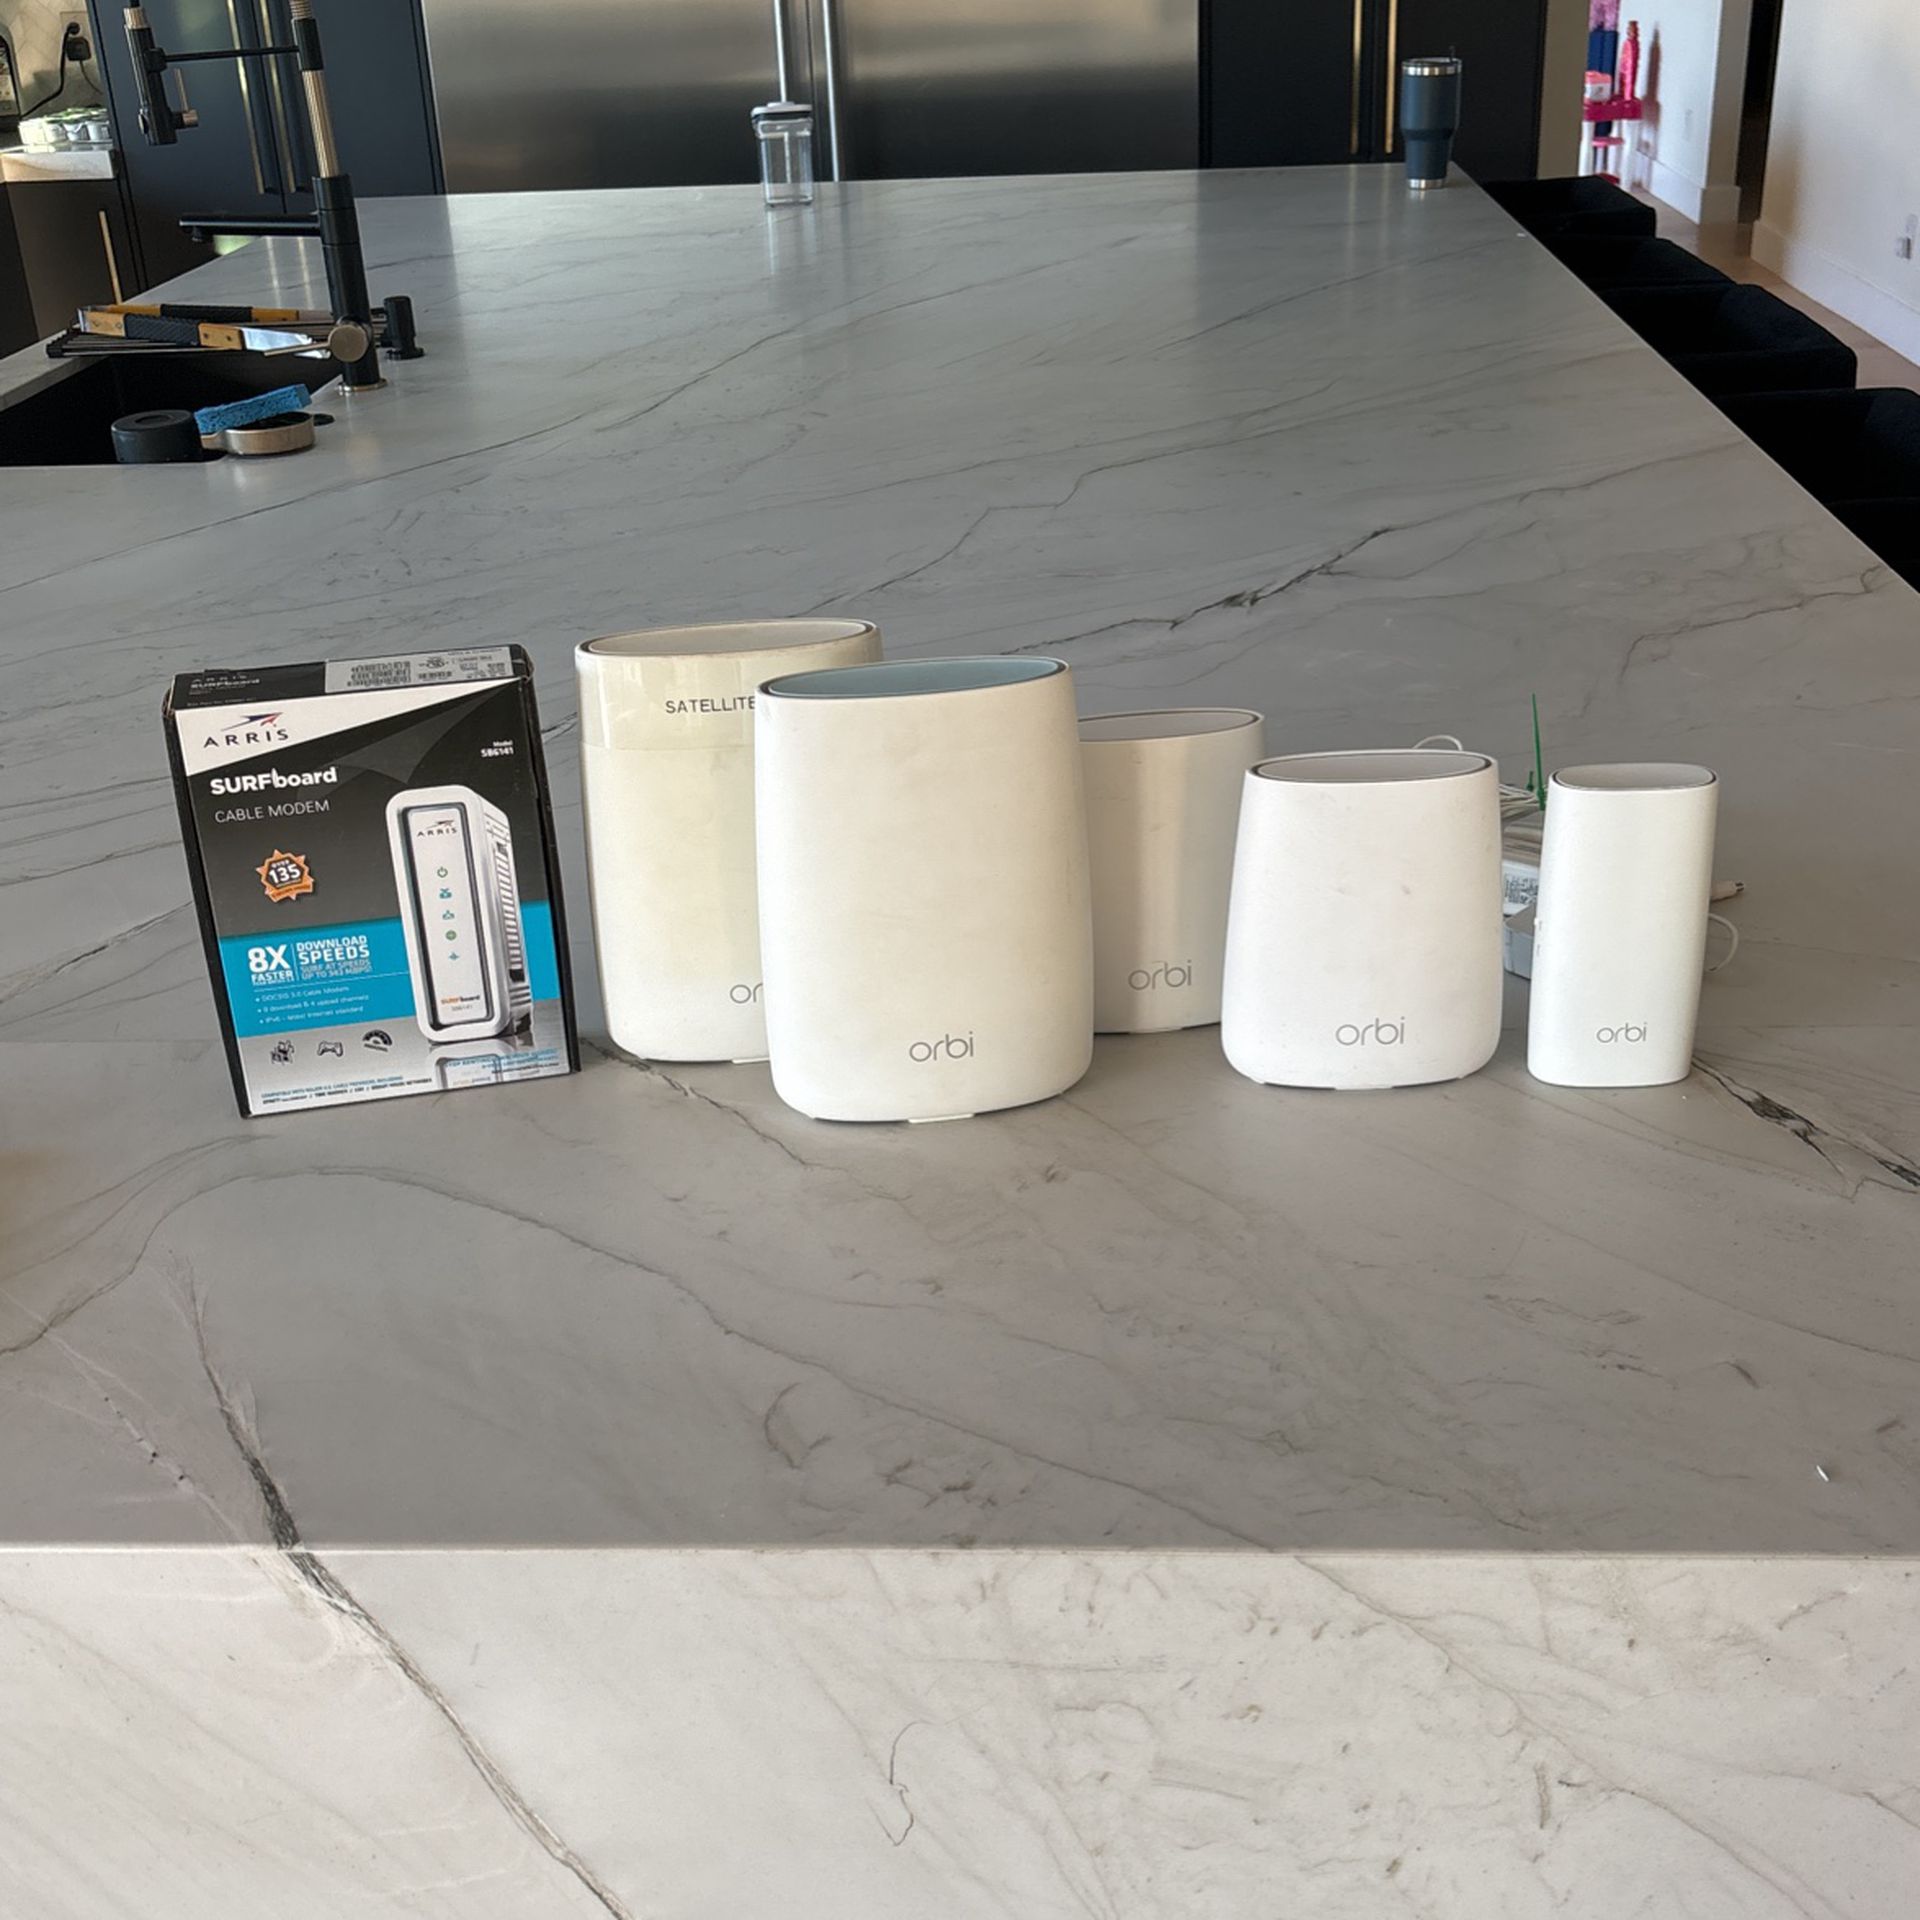 Orbi Wireless Mesh Network System & Router 